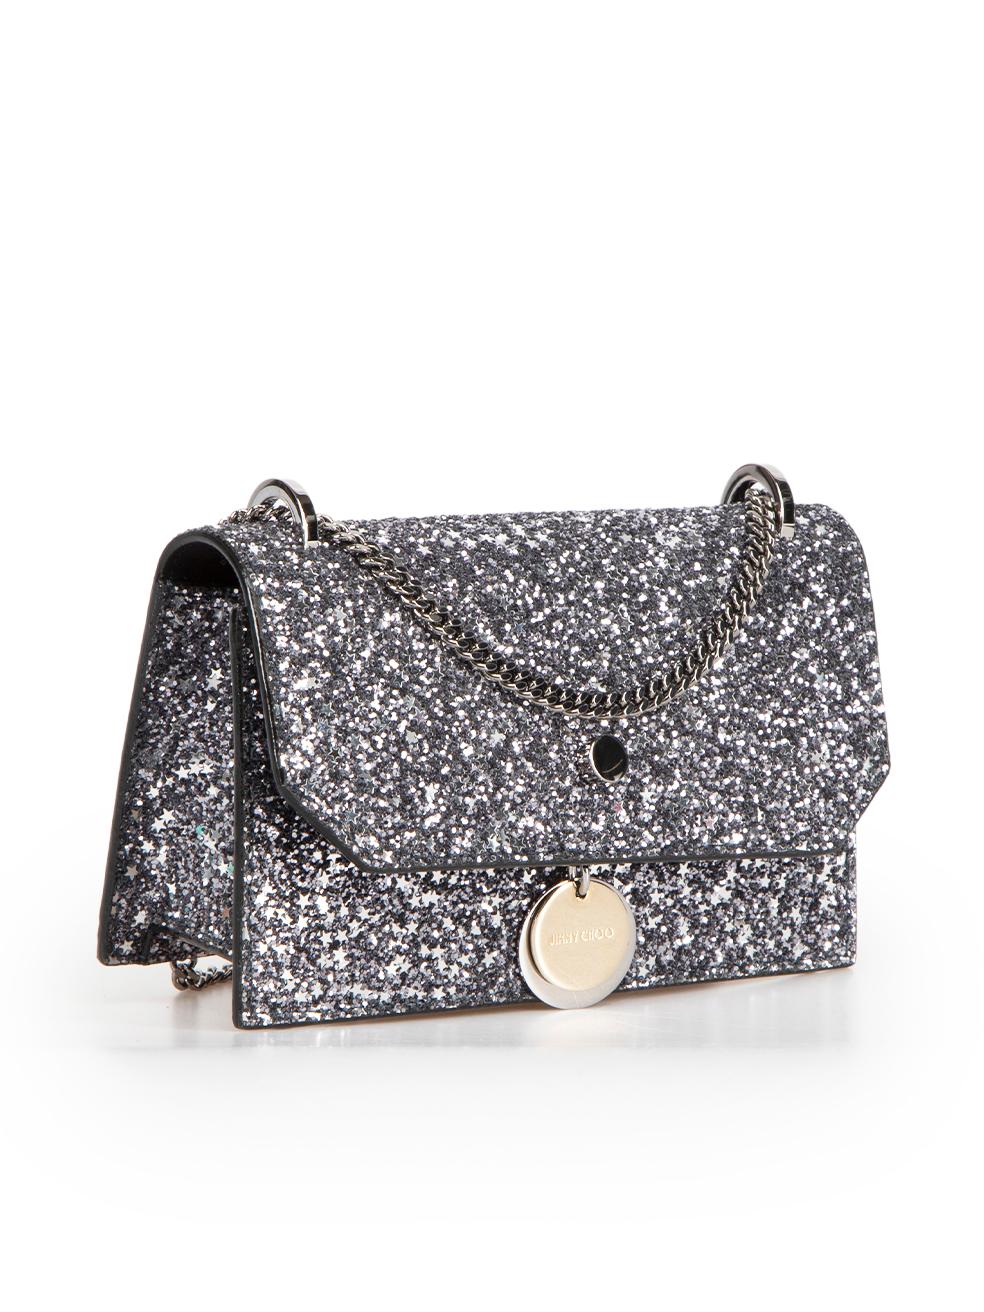 CONDITION is Never worn, with tags. No visible wear to bag is evident on this new Jimmy Choo designer resale item. This bag comes with original box and dust bag.
 
Details
Finley
Silver
Glitter
Mini crossbody bag
Two ways chain shoulder strap
Front